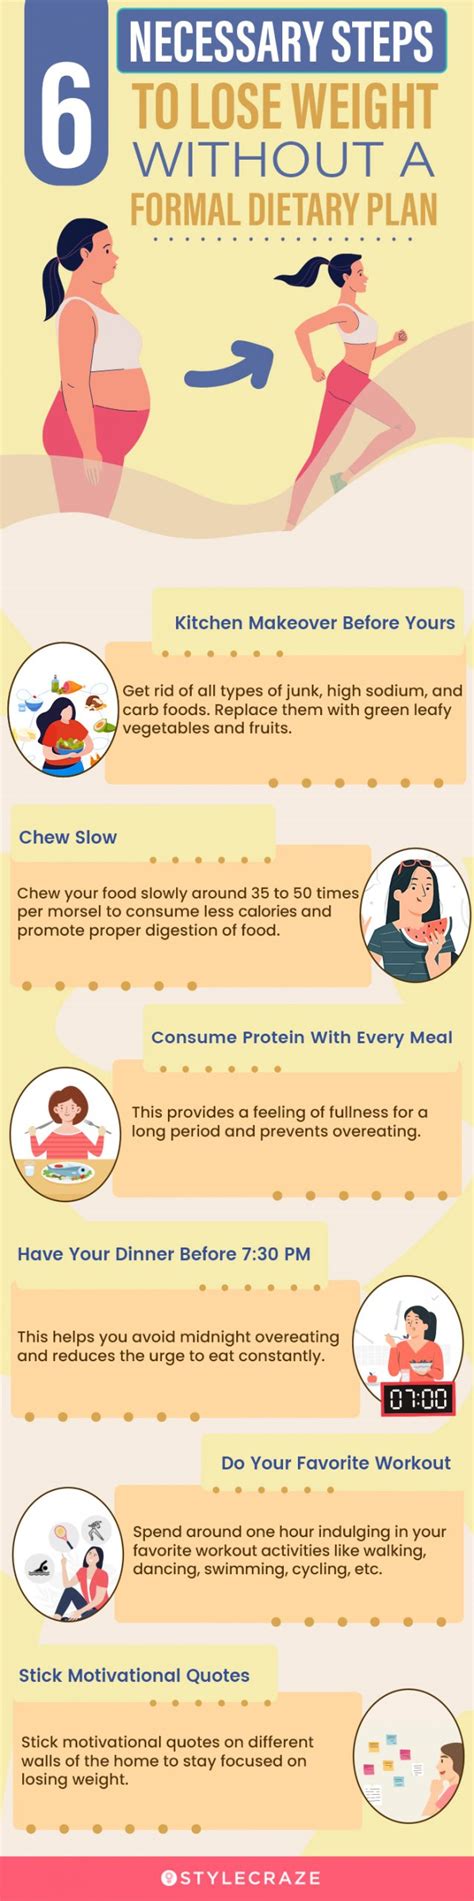 25 Proven Ways To Lose Weight Without Diet Or Exercise